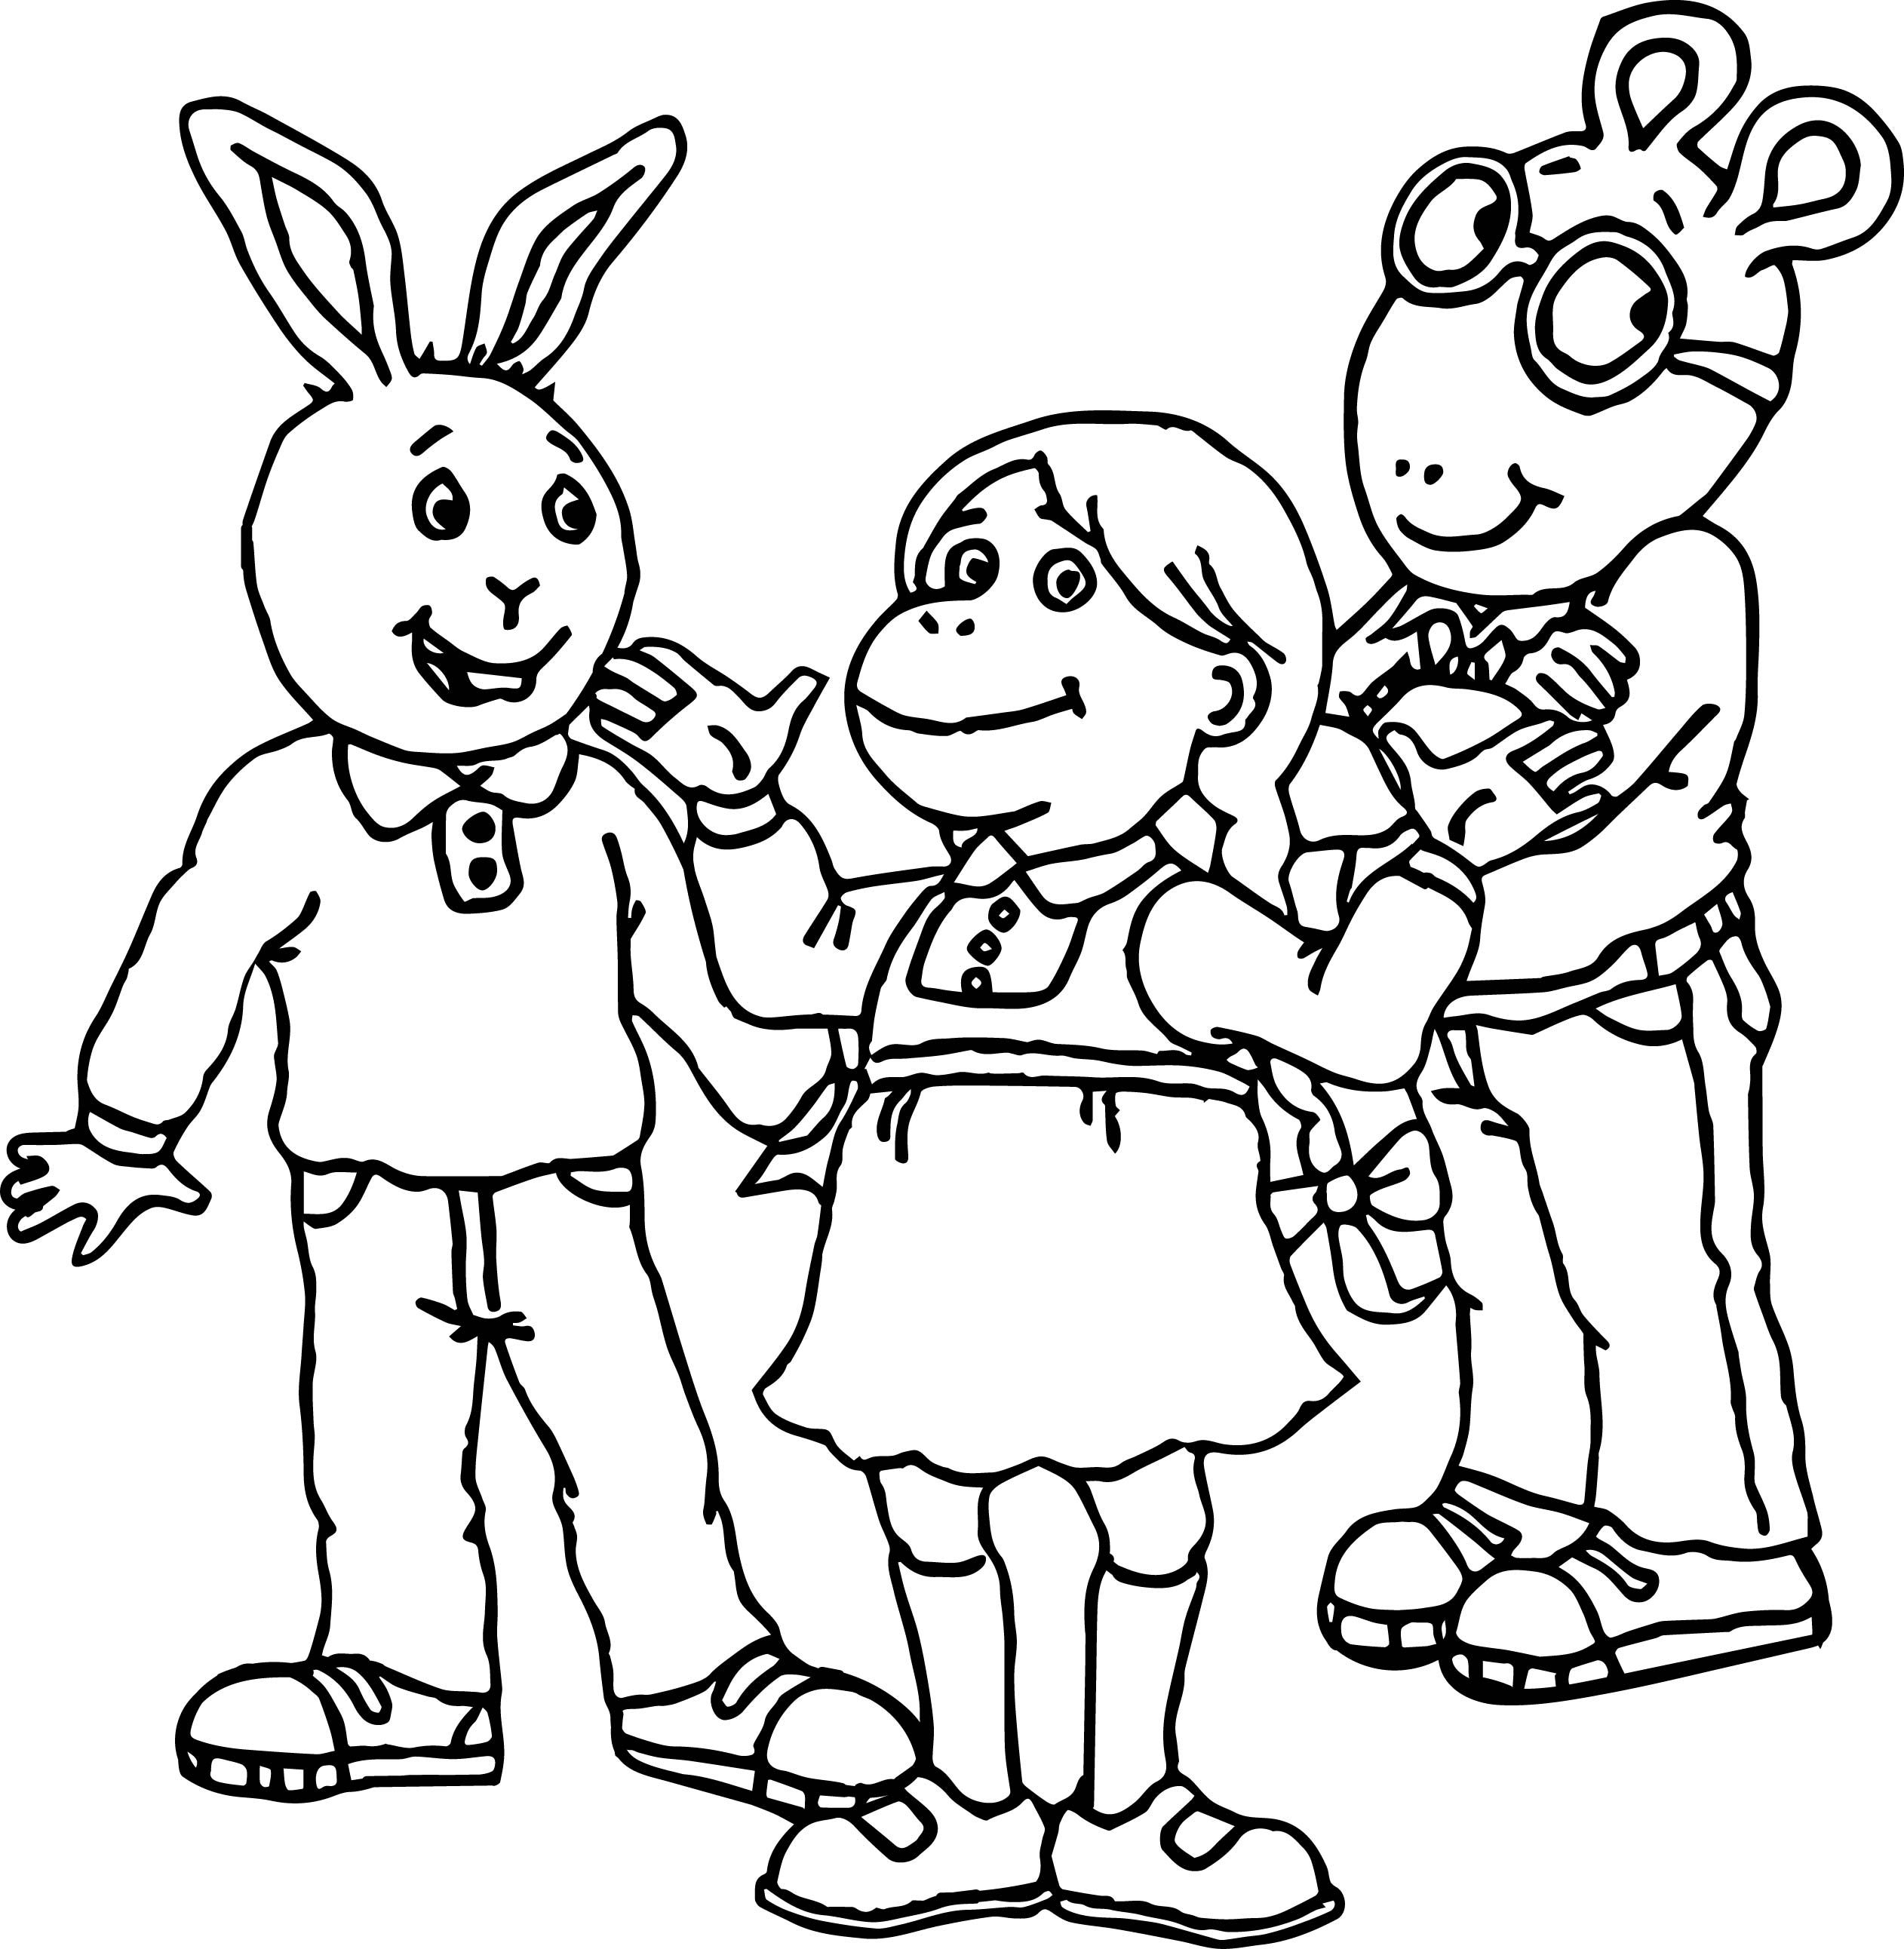 Printable Arthur Coloring Pages Pdf - Free Printable Arthur Coloring Pages 1